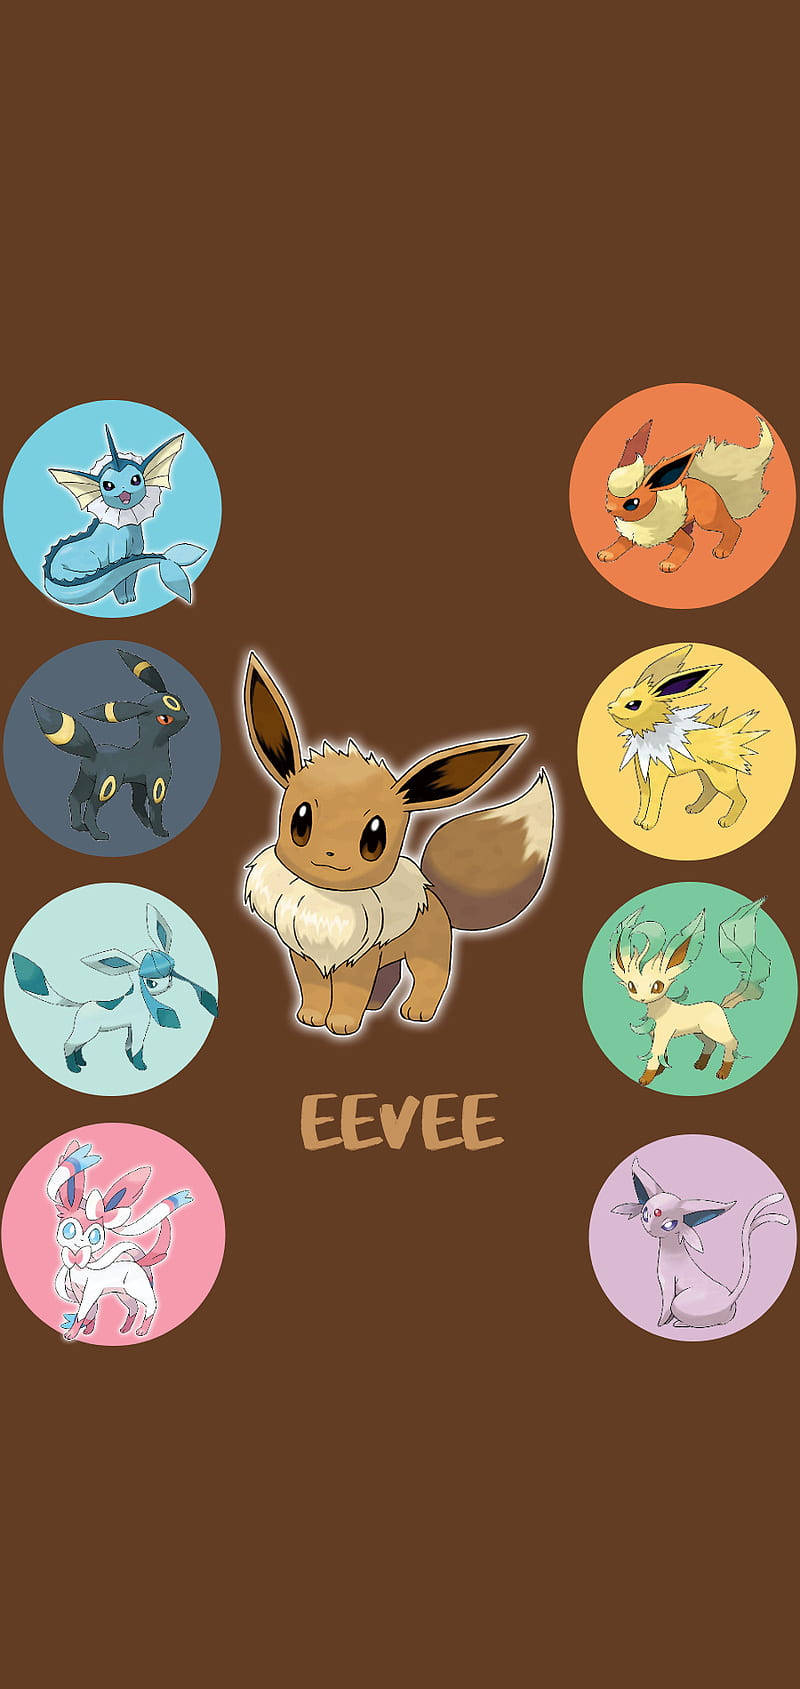 Playful Eevee character brightens up your day with a playful iPhone wallpaper. Wallpaper